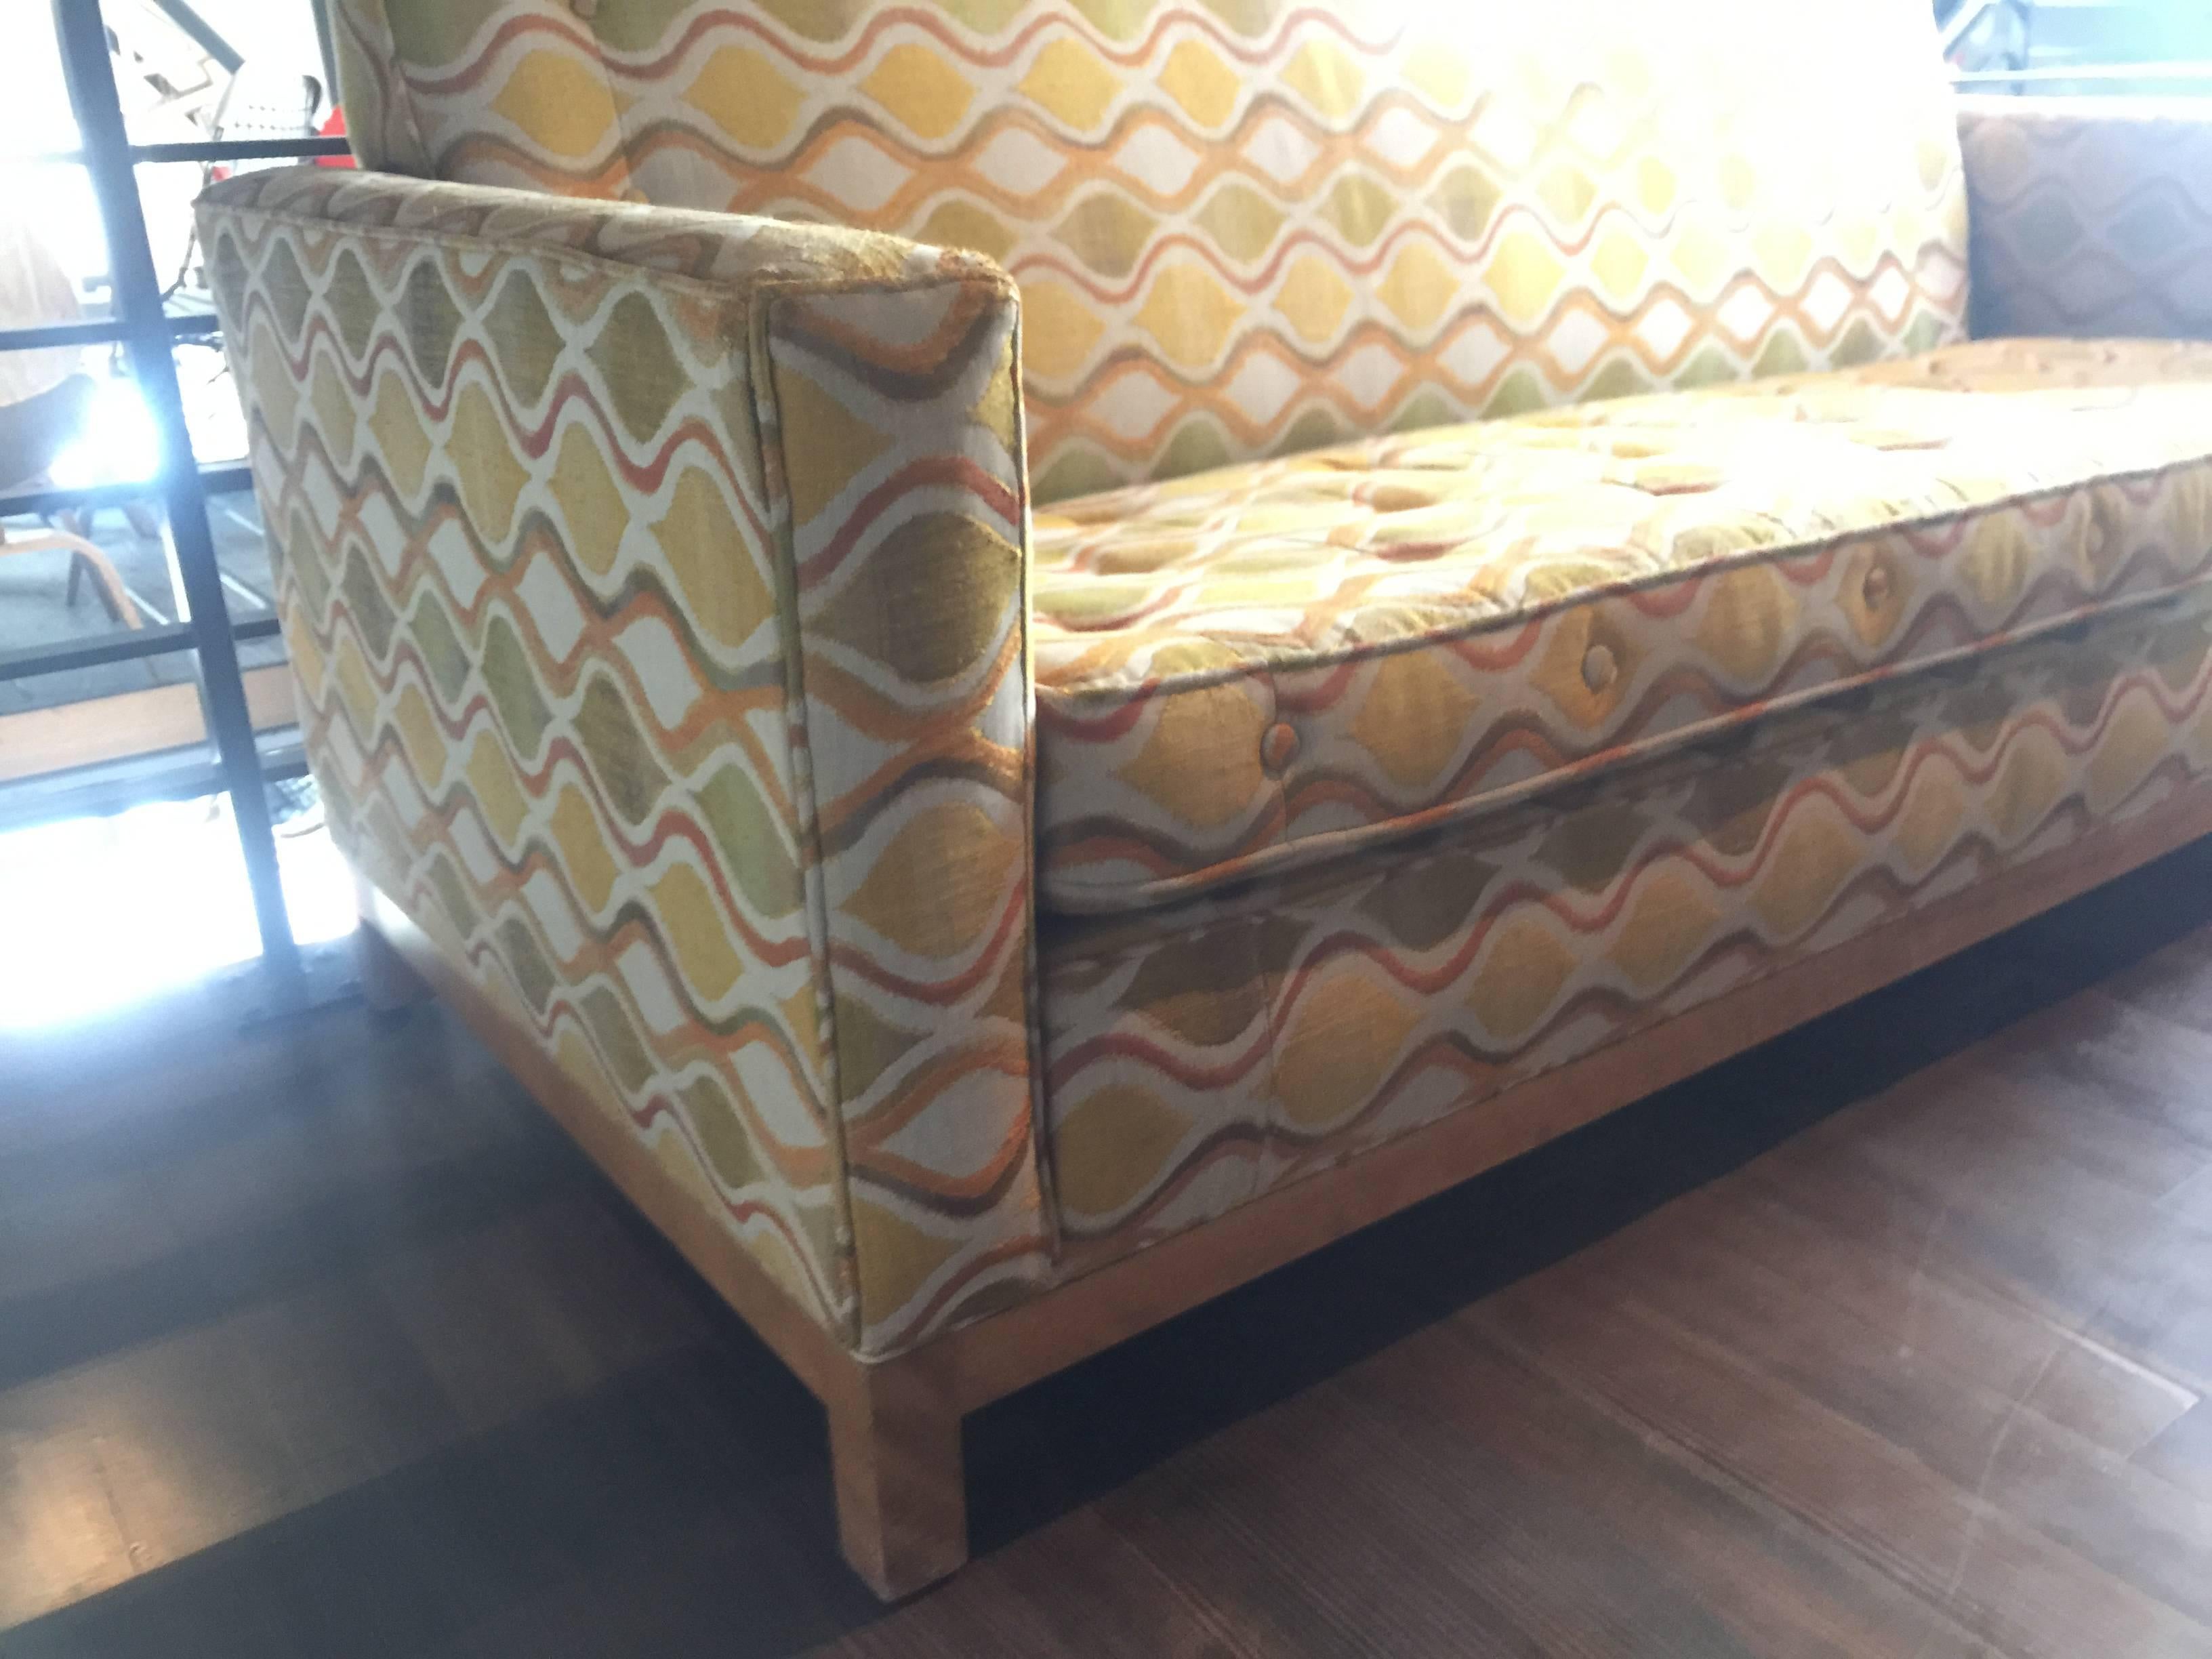 Stunning and super confortable Widdicomb sofa settee in fantastic condition. Foam is perfect and upholstery is in great shape
very little wear.